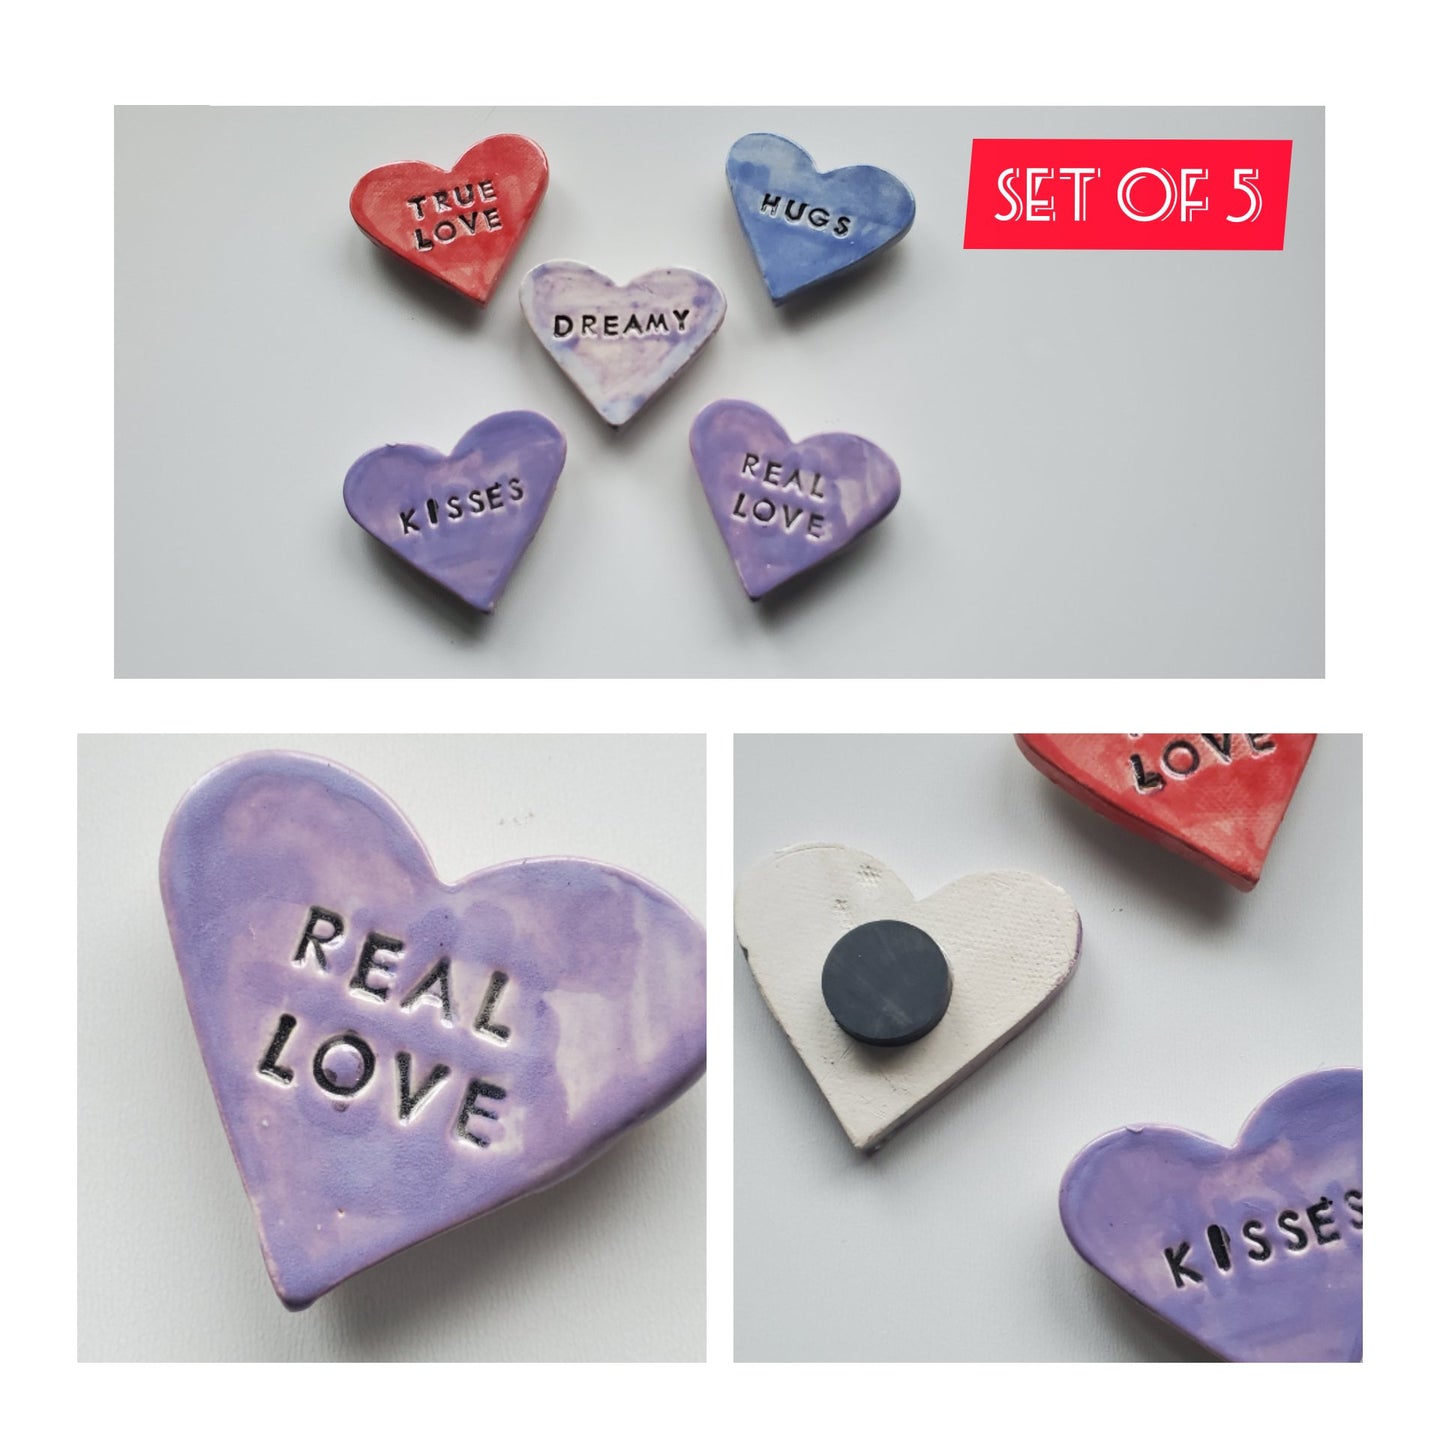 Set of 5 ceramic heart  magnets by muddy muse